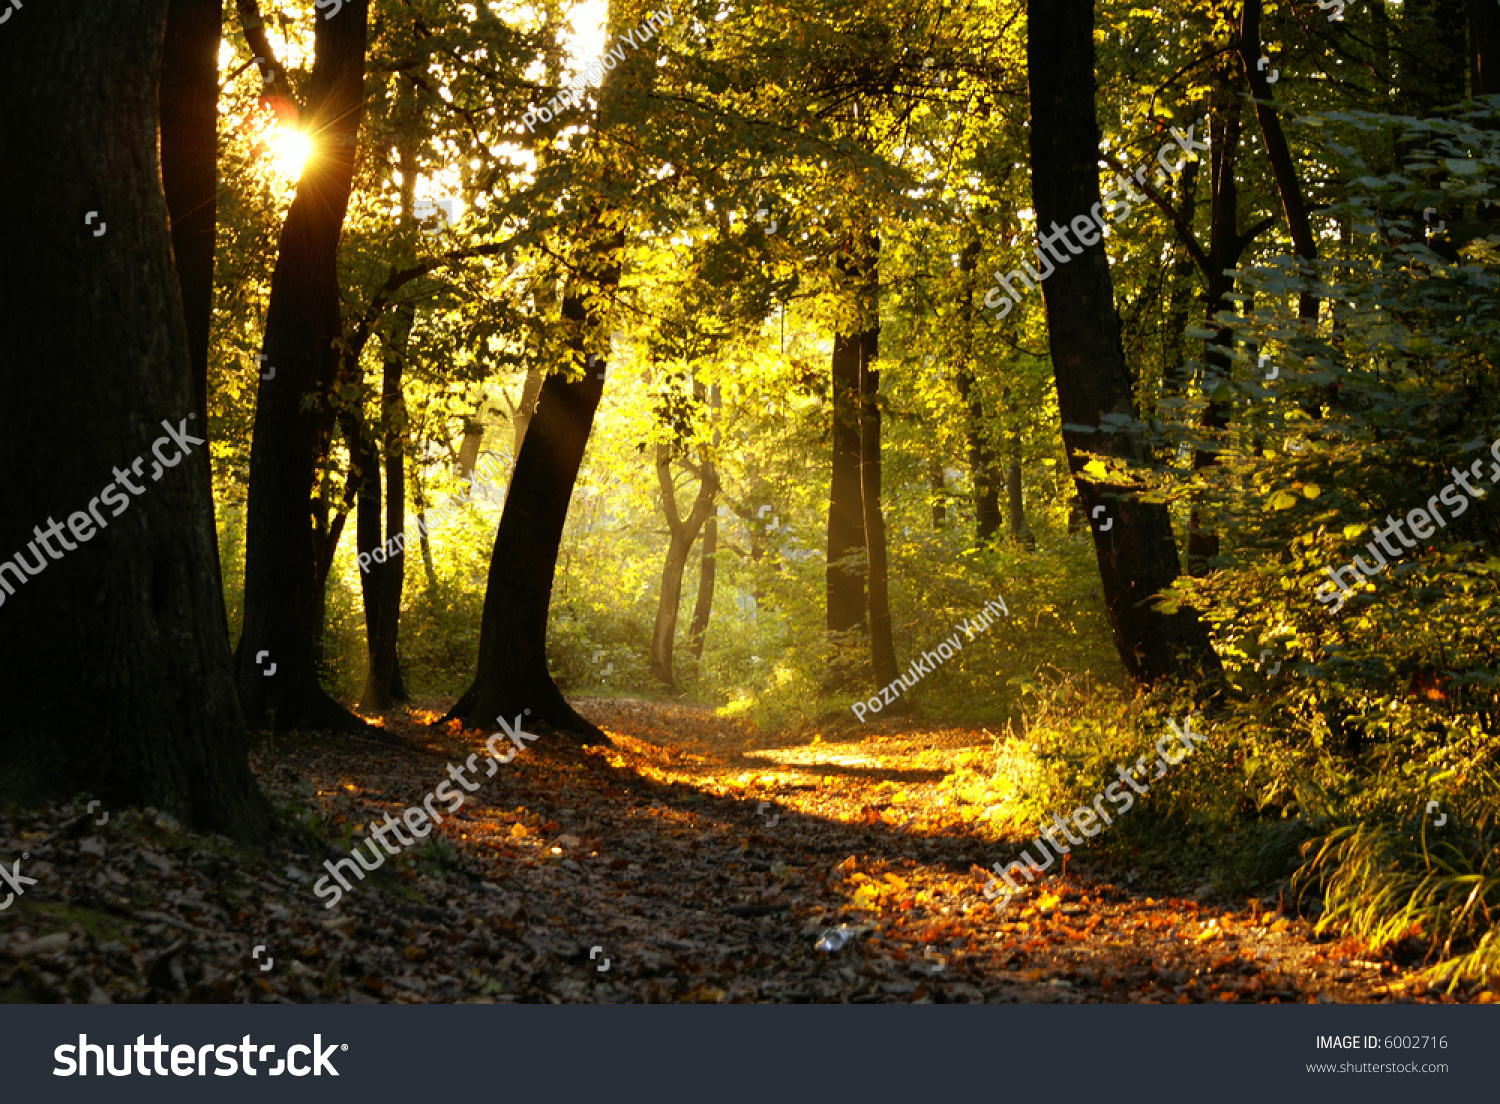 Sunset Through Branches Of Trees Stock Photo 6002716 : Shutterstock